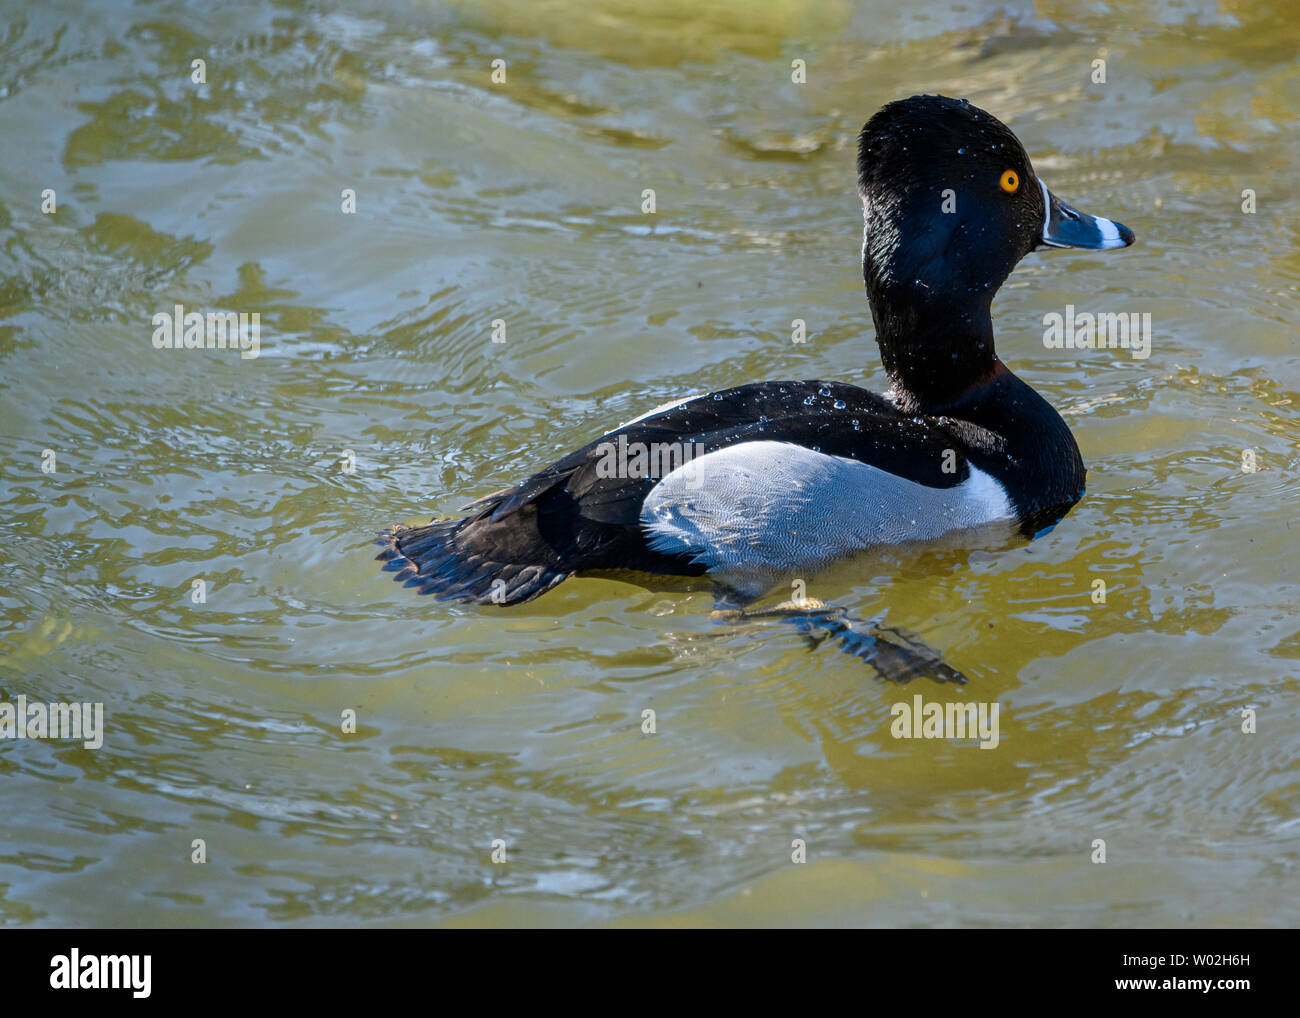 Beautiful ring necked male duck swimming in the lake. Black and grey bird. Grey, striped bill and intense yellow eyes. Red ring around neck. Sunny Stock Photo